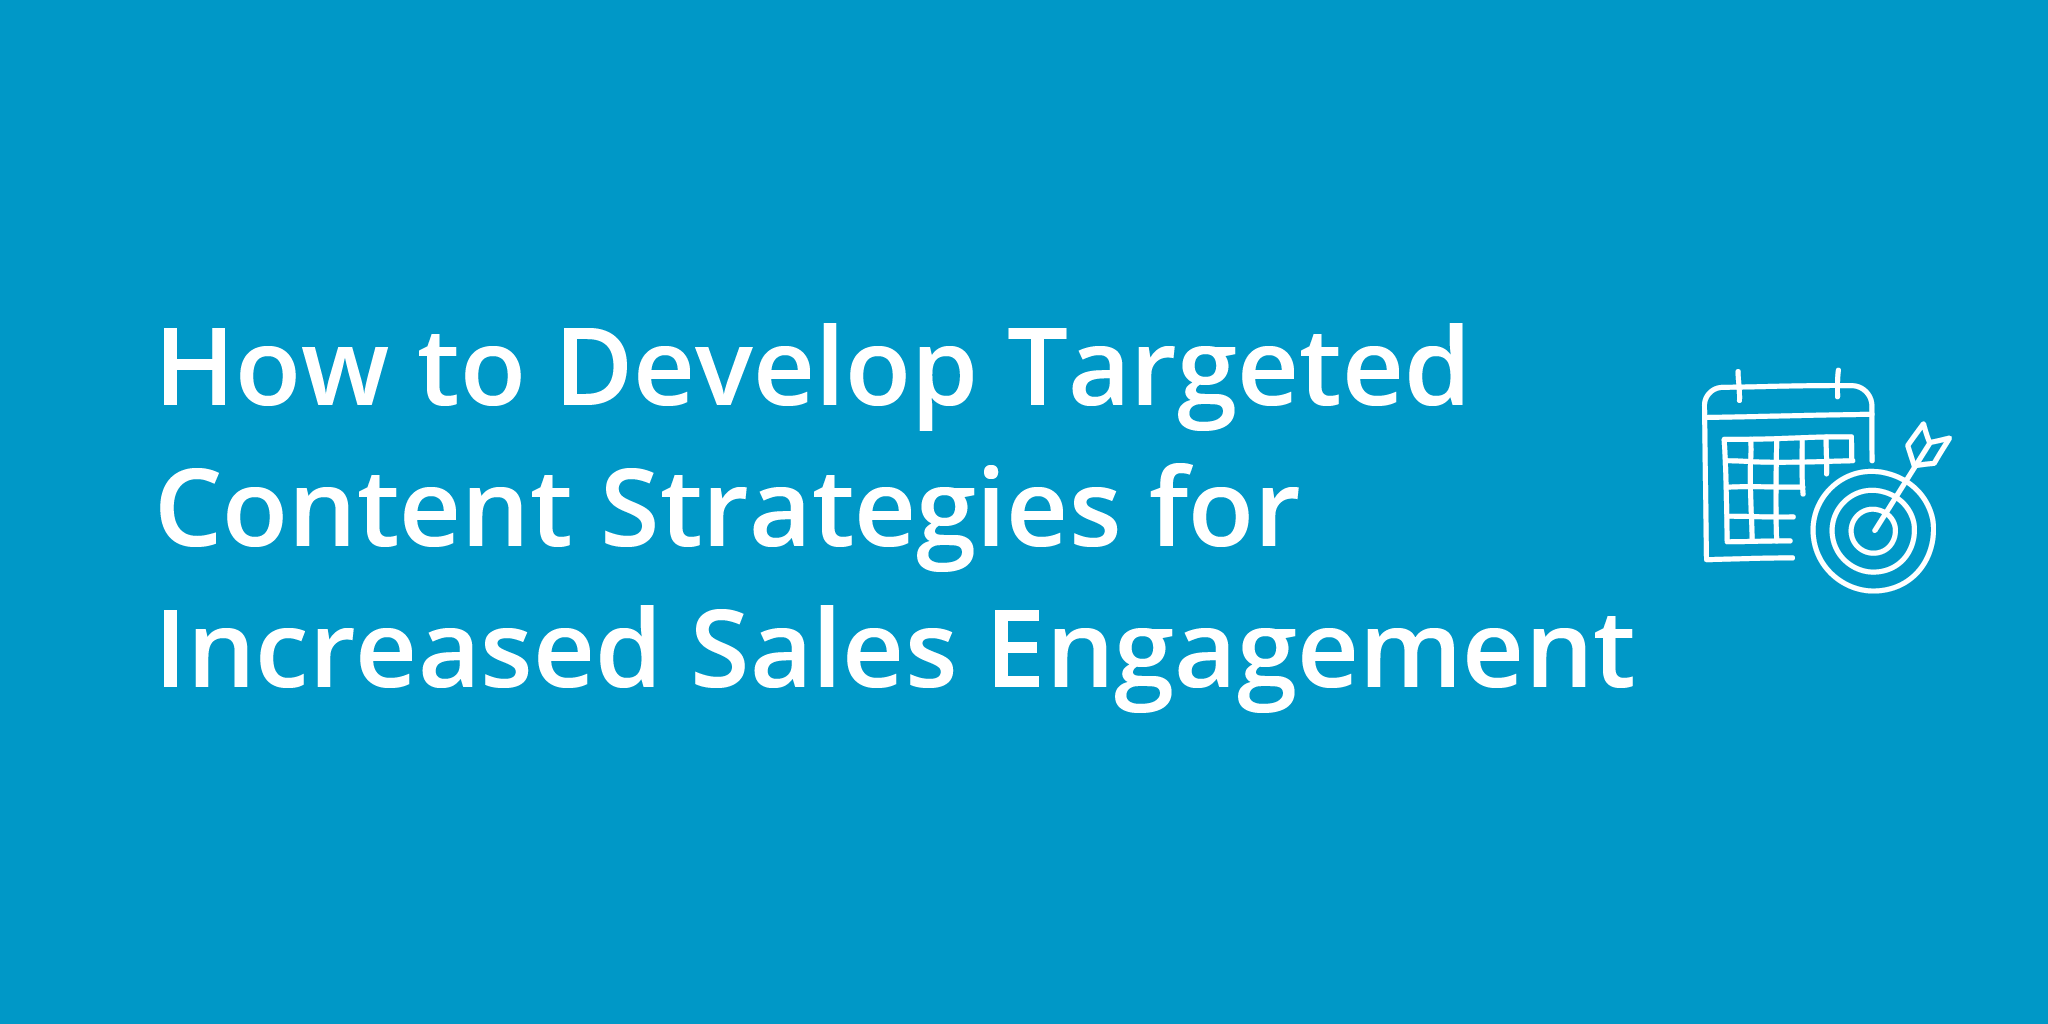 How to Develop Targeted Content Strategies for Increased Sales Engagement | Telephones for business